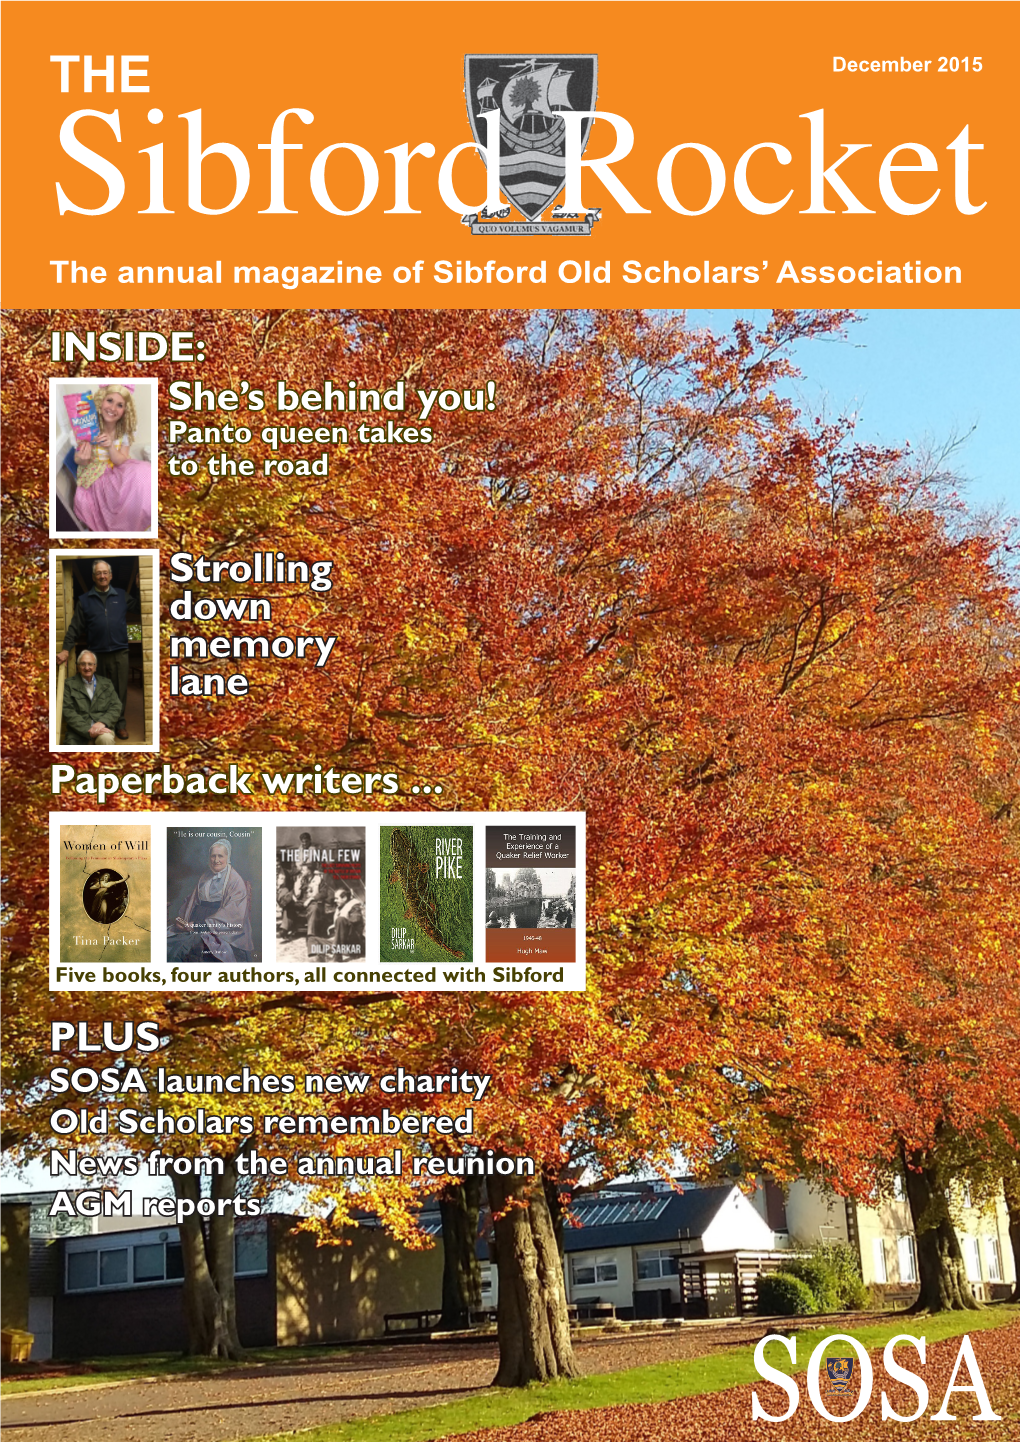 2015 Sibford Rocket the Annual Magazine of Sibford Old Scholars’ Association INSIDE: She’S Behind You! Panto Queen Takes to the Road